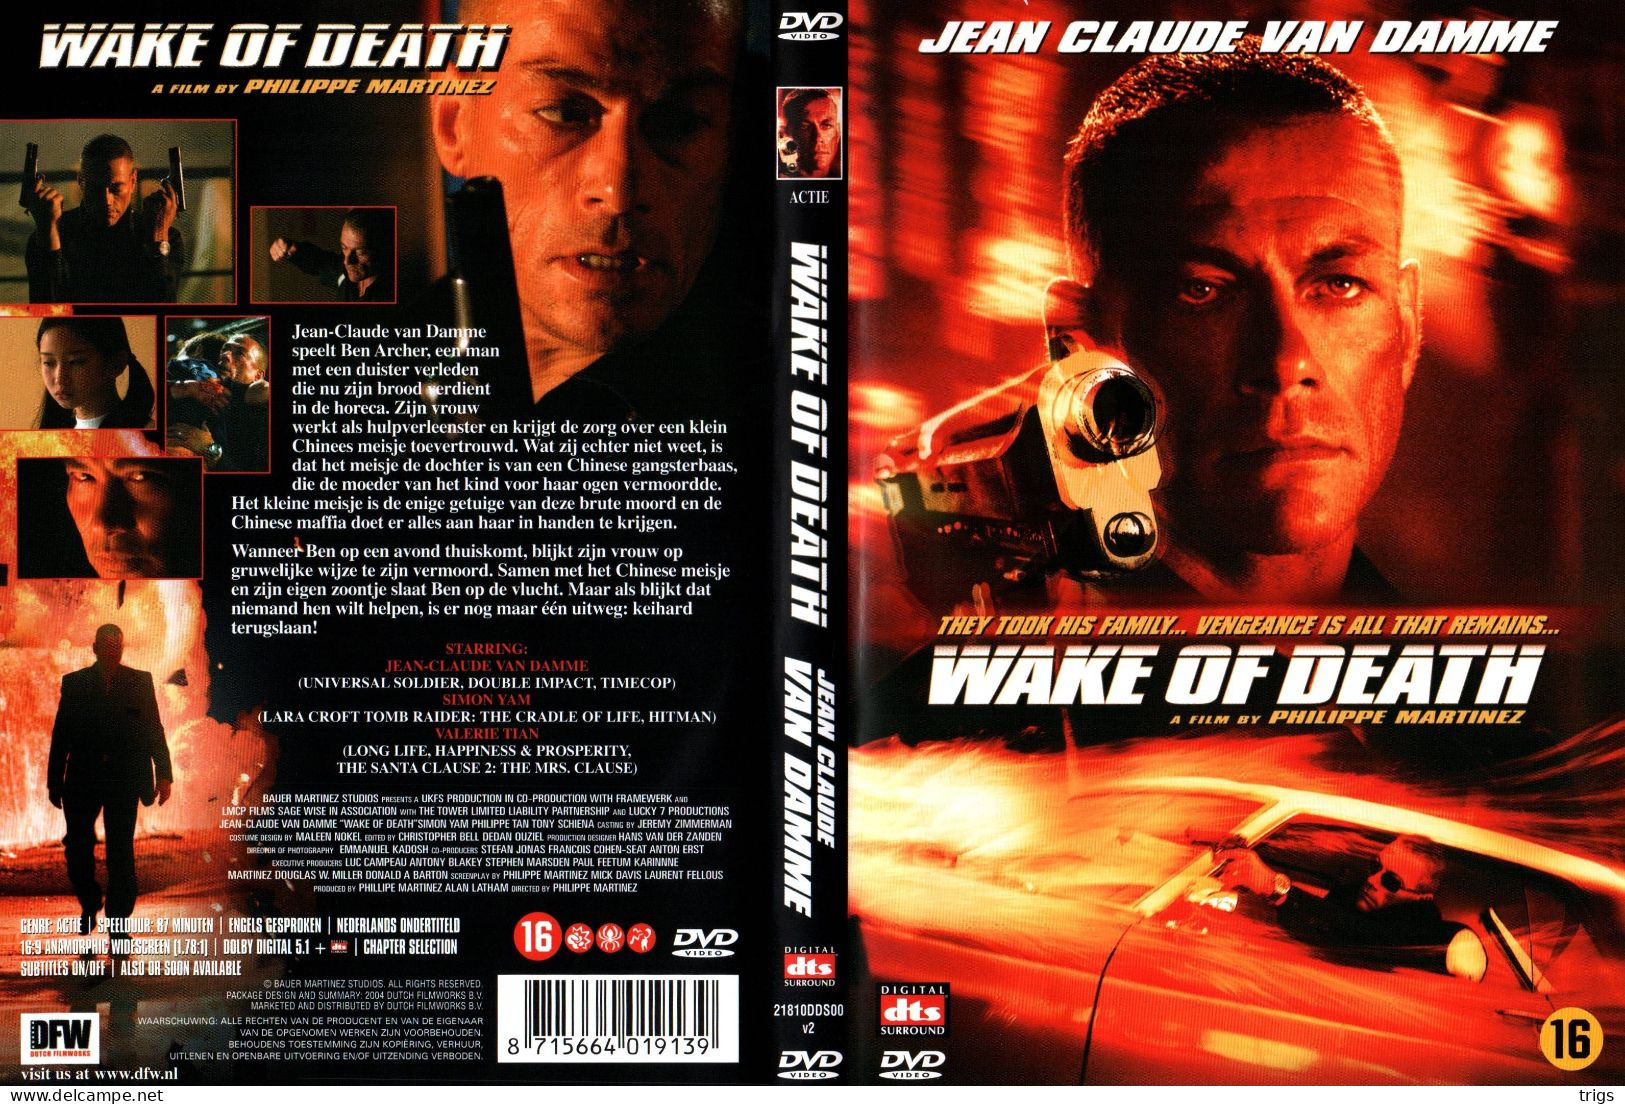 DVD - Wake Of Death - Action, Aventure